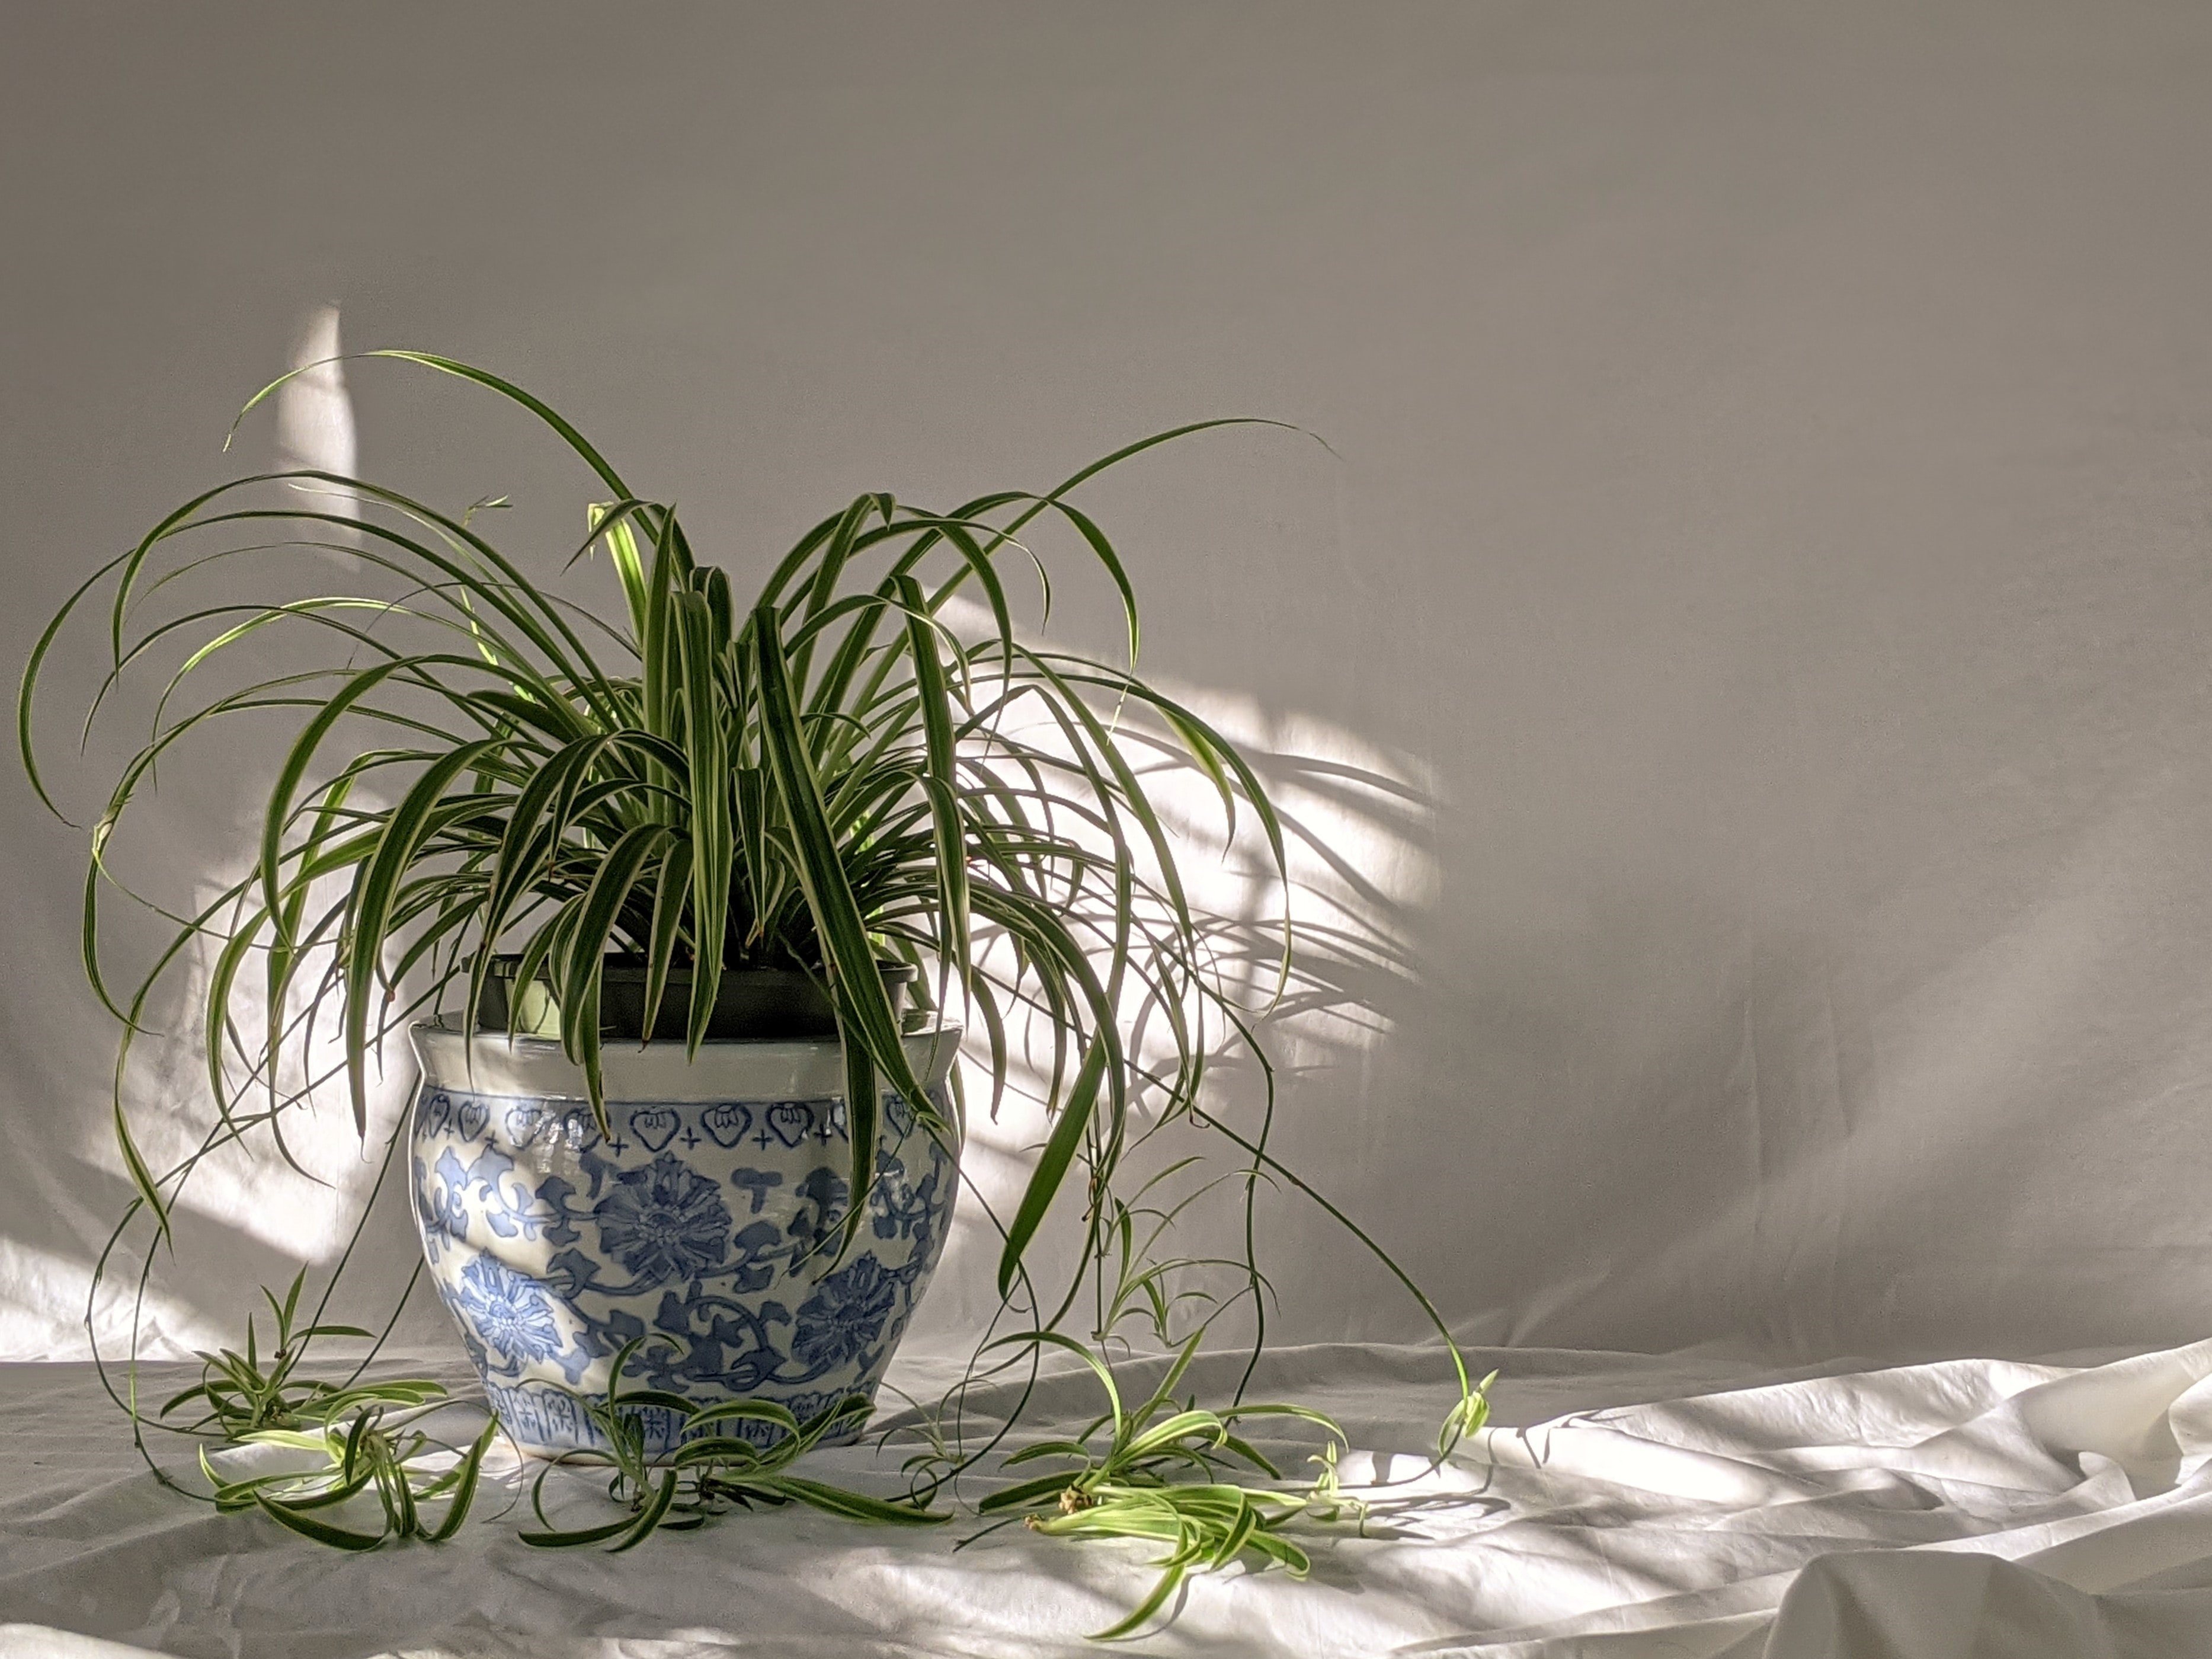 Spider plant - Gardening at USask - College of Agriculture and Bioresources